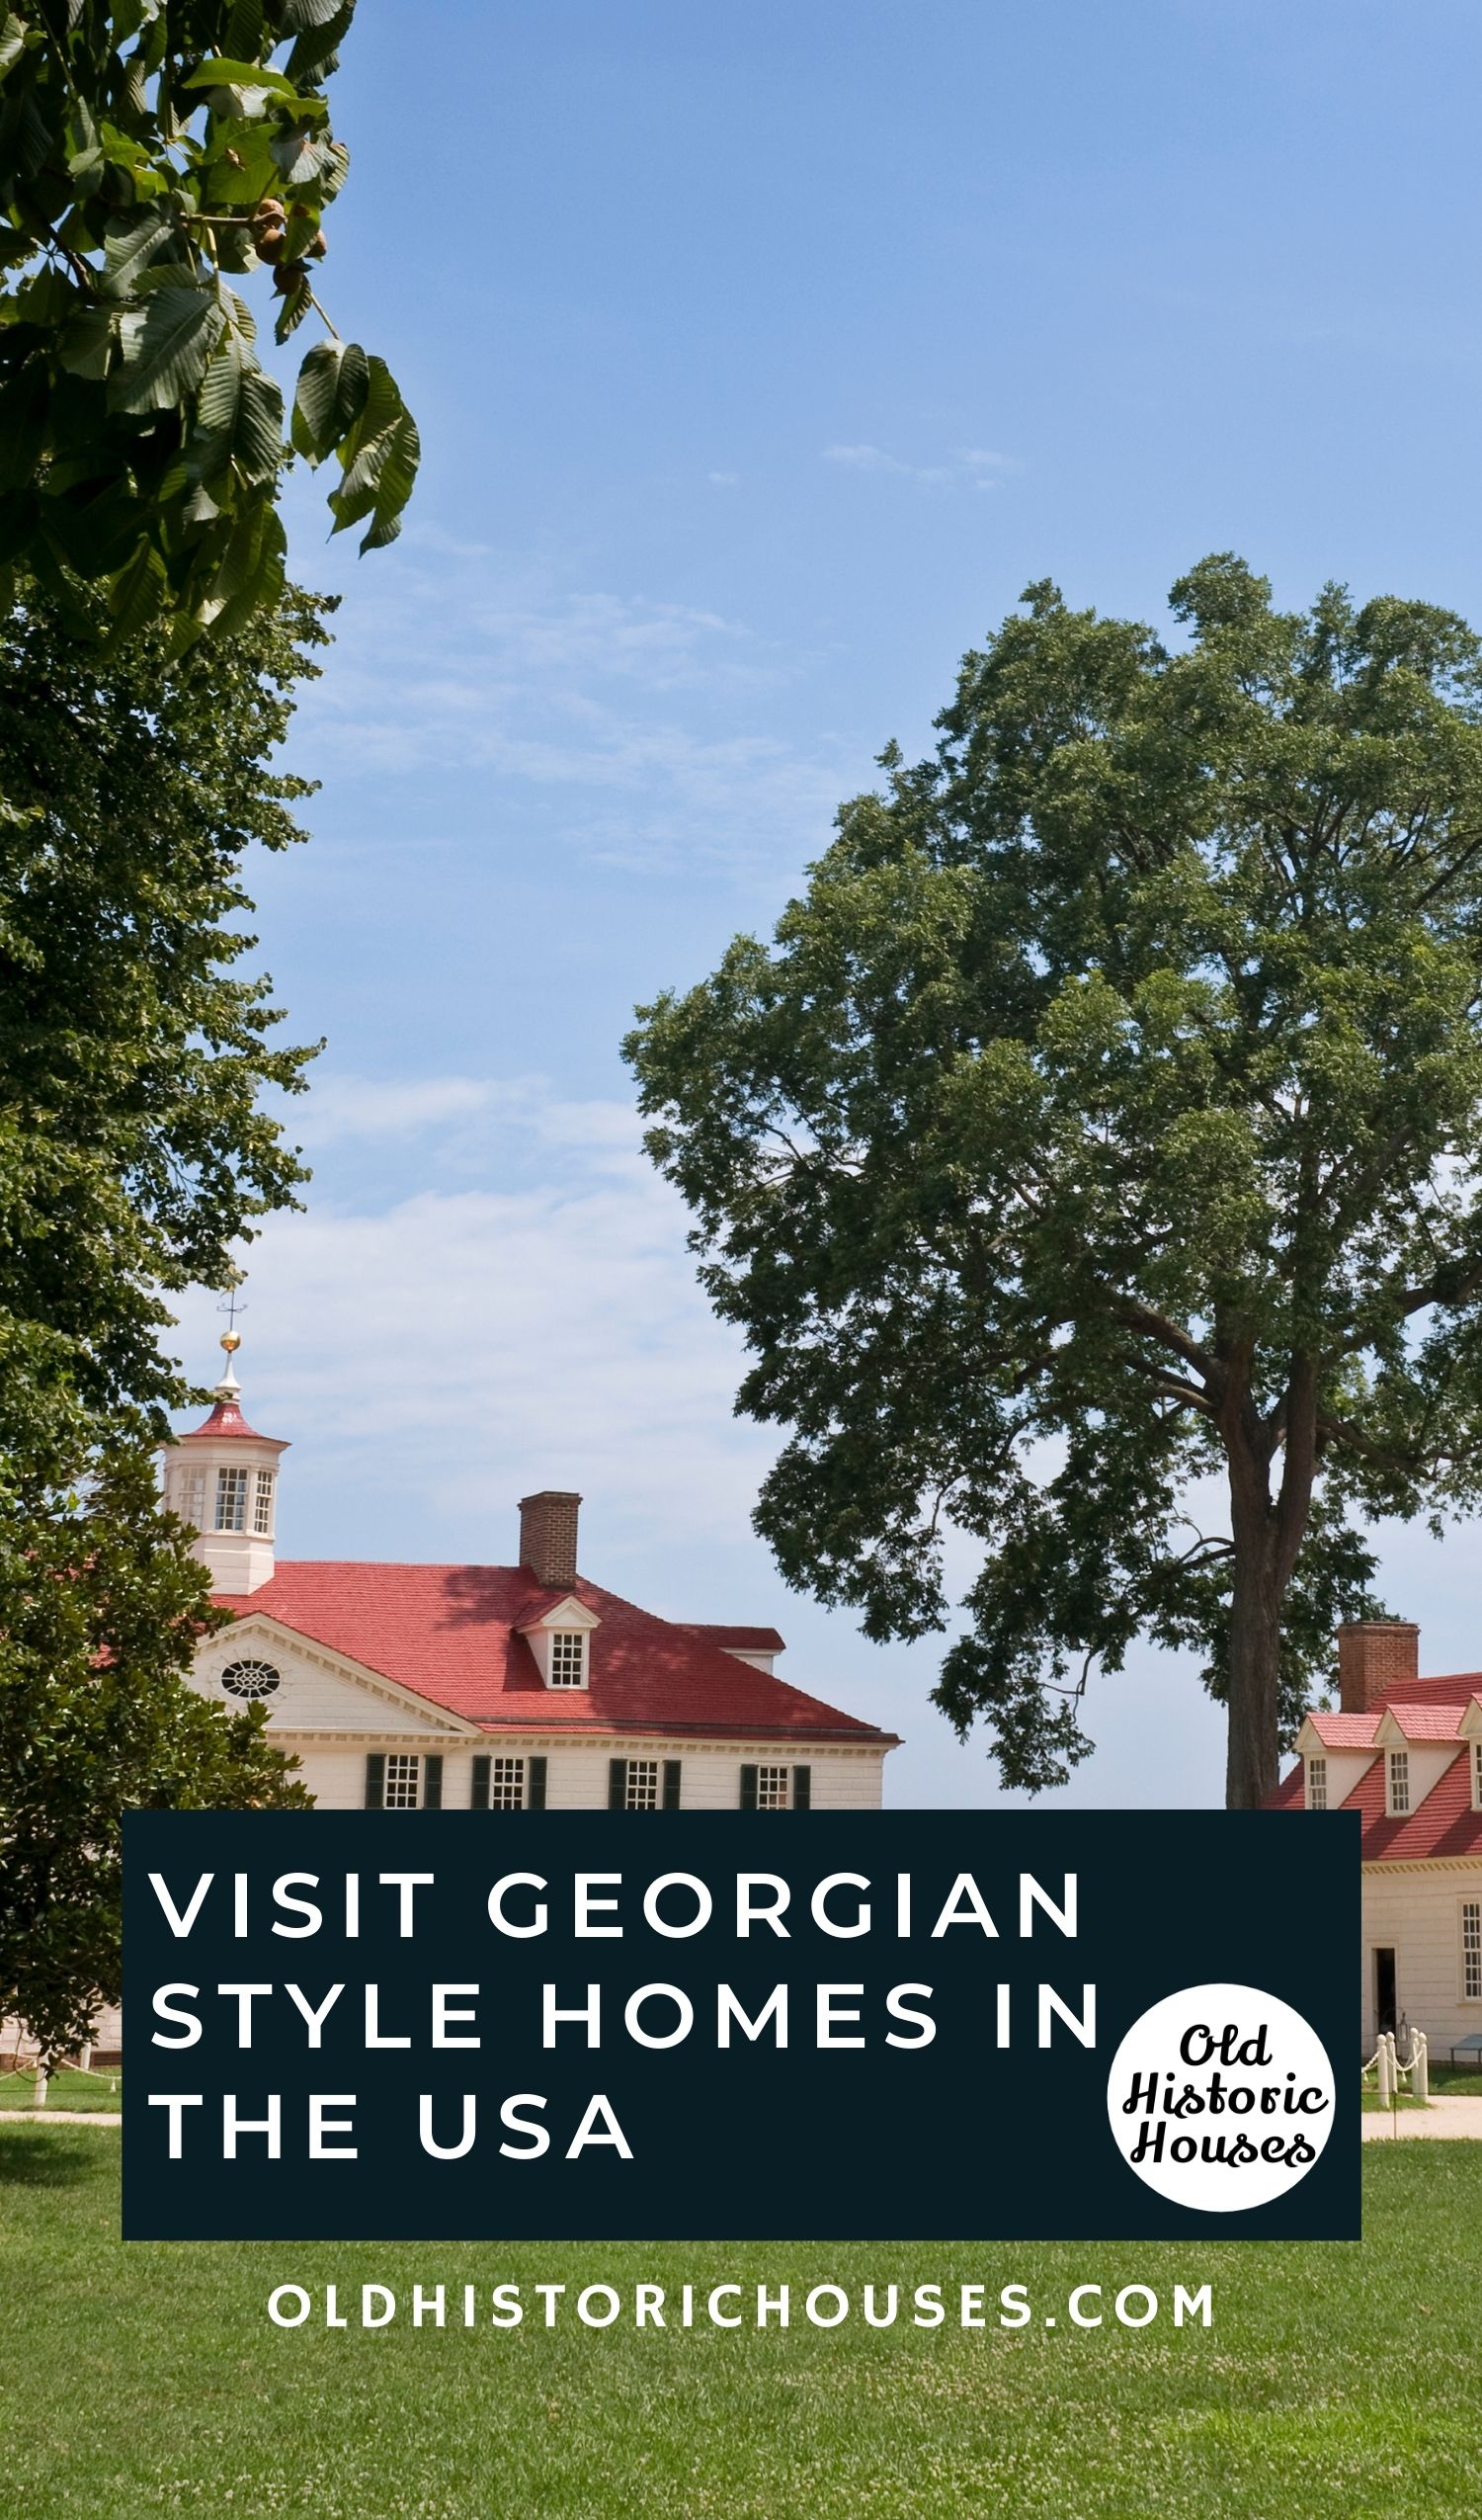 Georgian style homes in the USA to visit and explore.